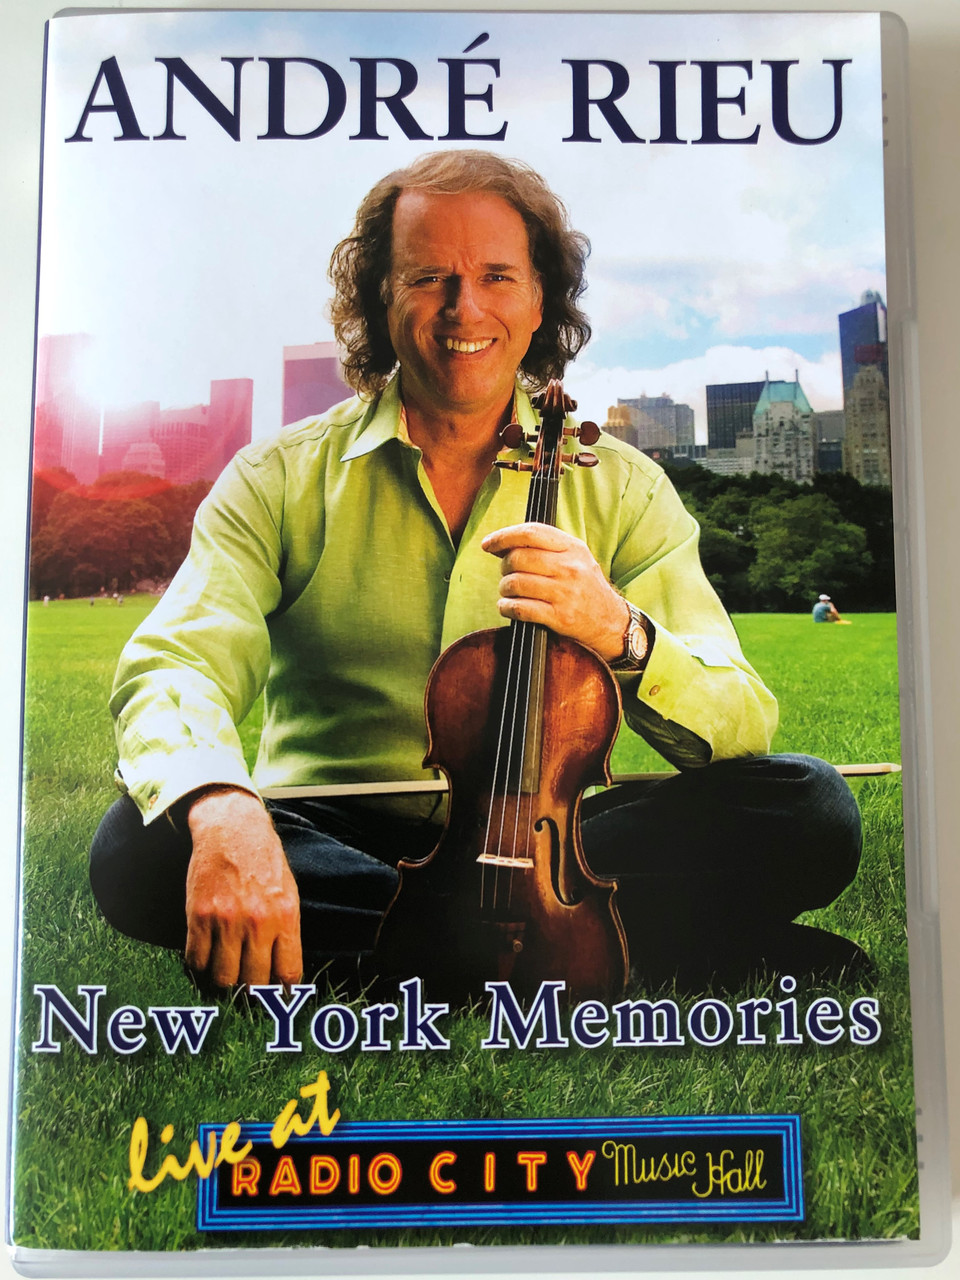 André Rieu DVD 2006 New York Memories - Live at Radio City Music Hall /  Directed by Pit Weyrich / Universal - Polydor - bibleinmylanguage